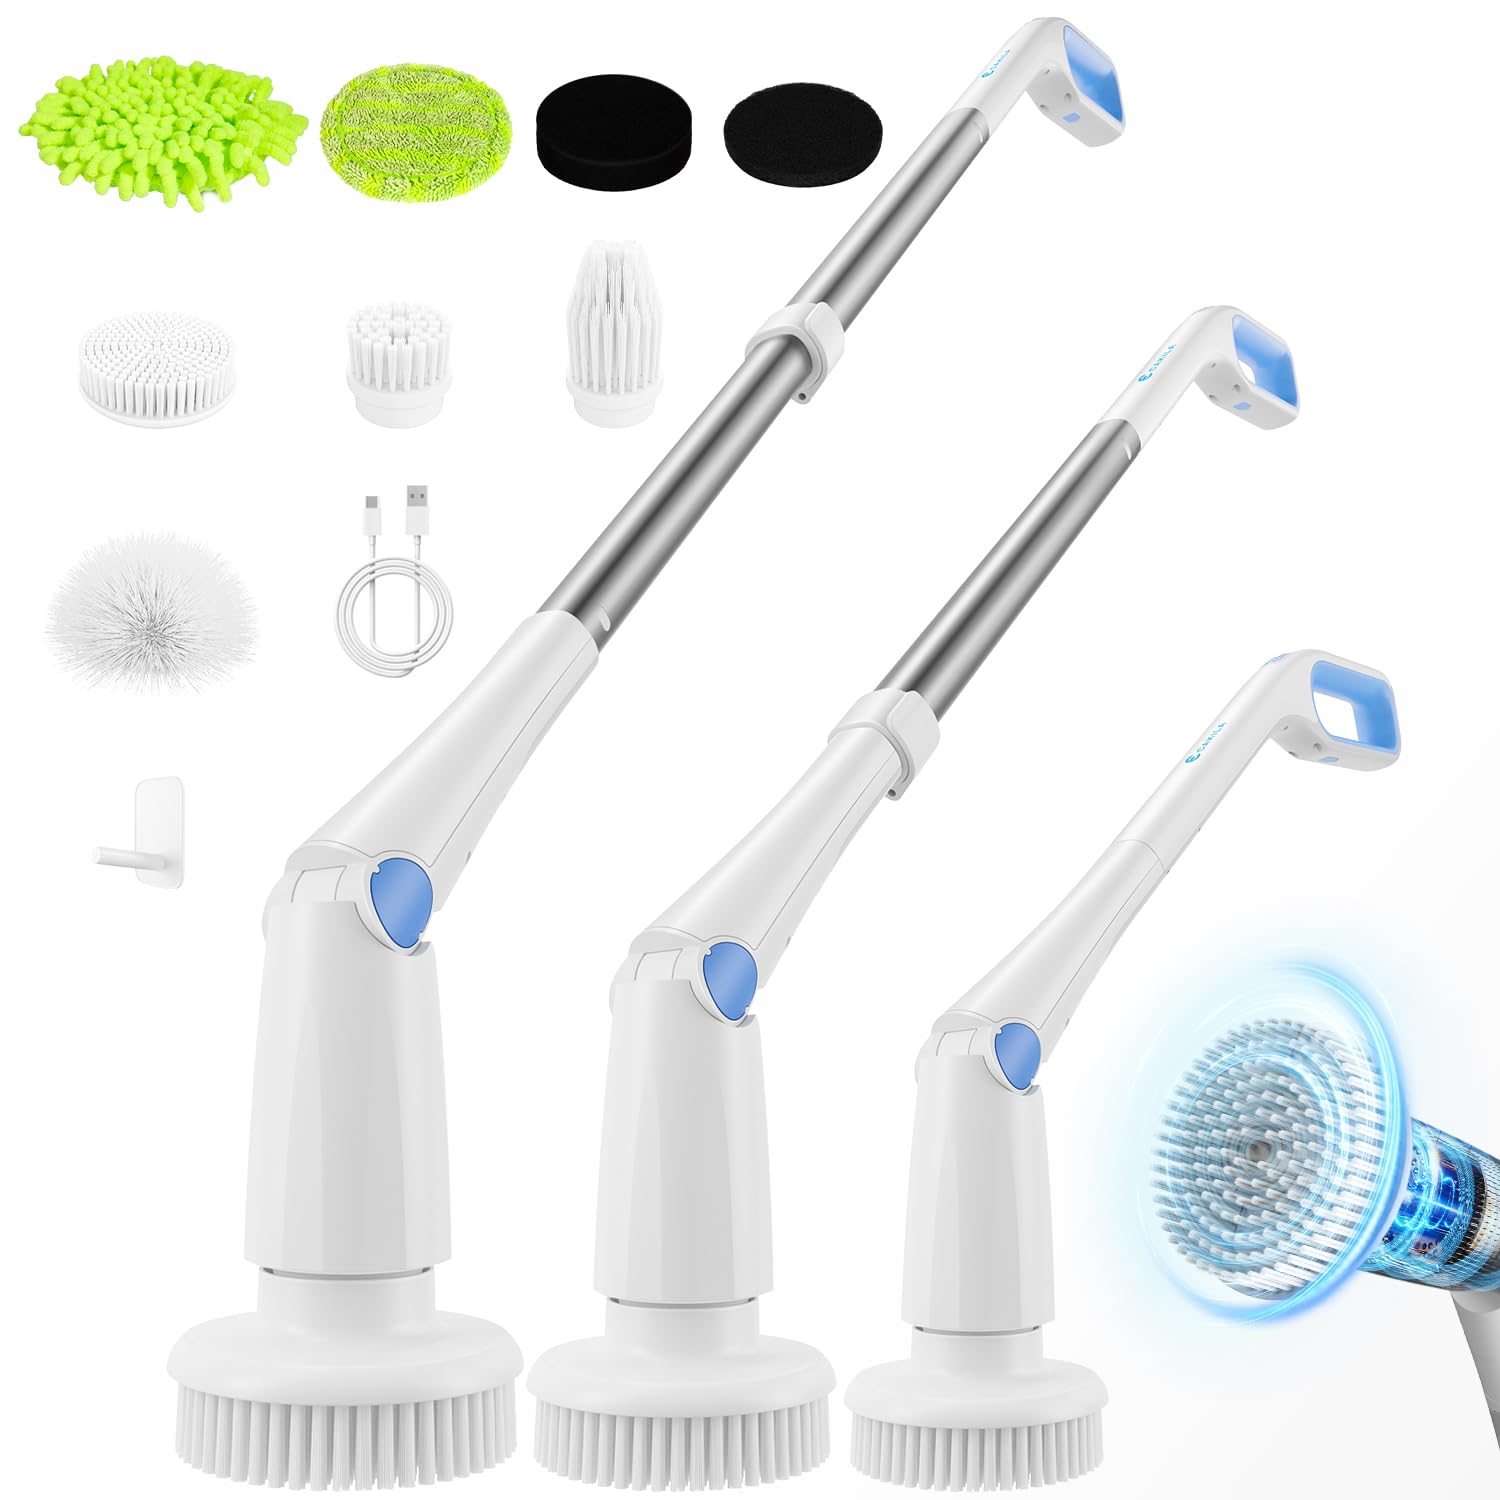 CAKILA Electric Spin Scrubber,Cordless Shower Cleaning Brush with 8 Replaceable Heads,Detachable Long Handle for Bathroom, Floor, Tile, Kitchen,Ideal Gift for Elders